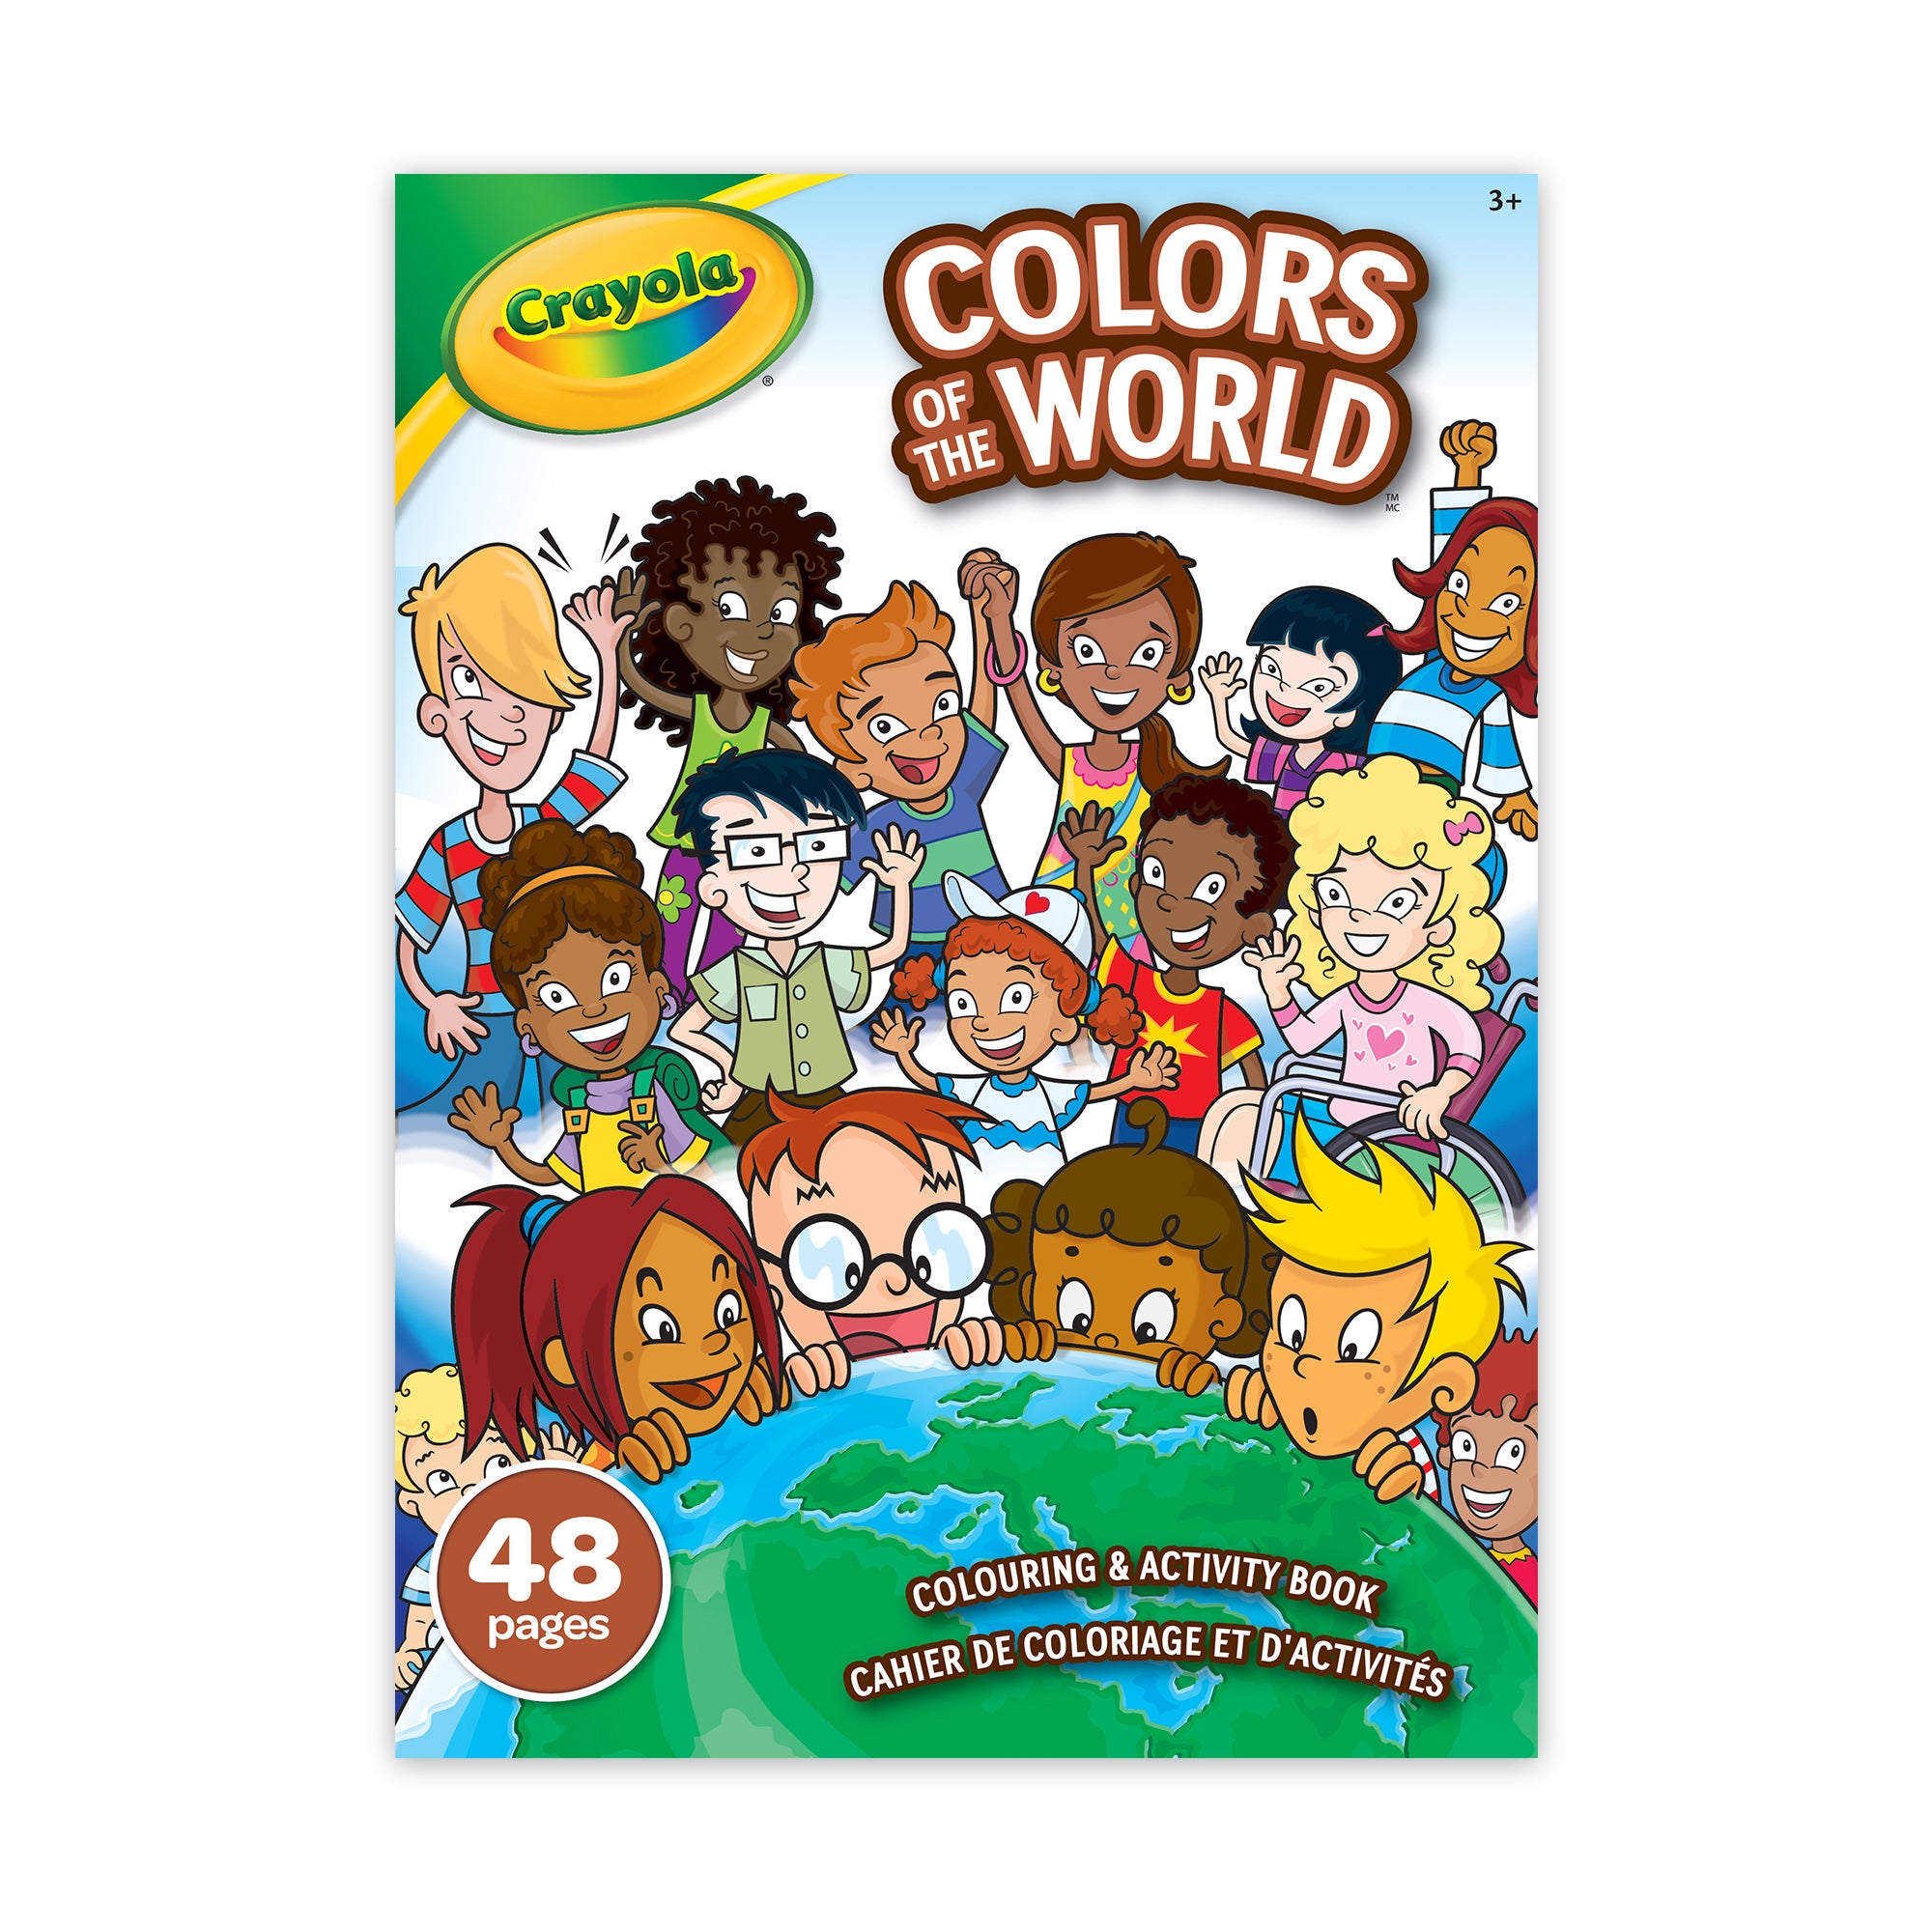 Crayola The Colors of the World Coloring Book